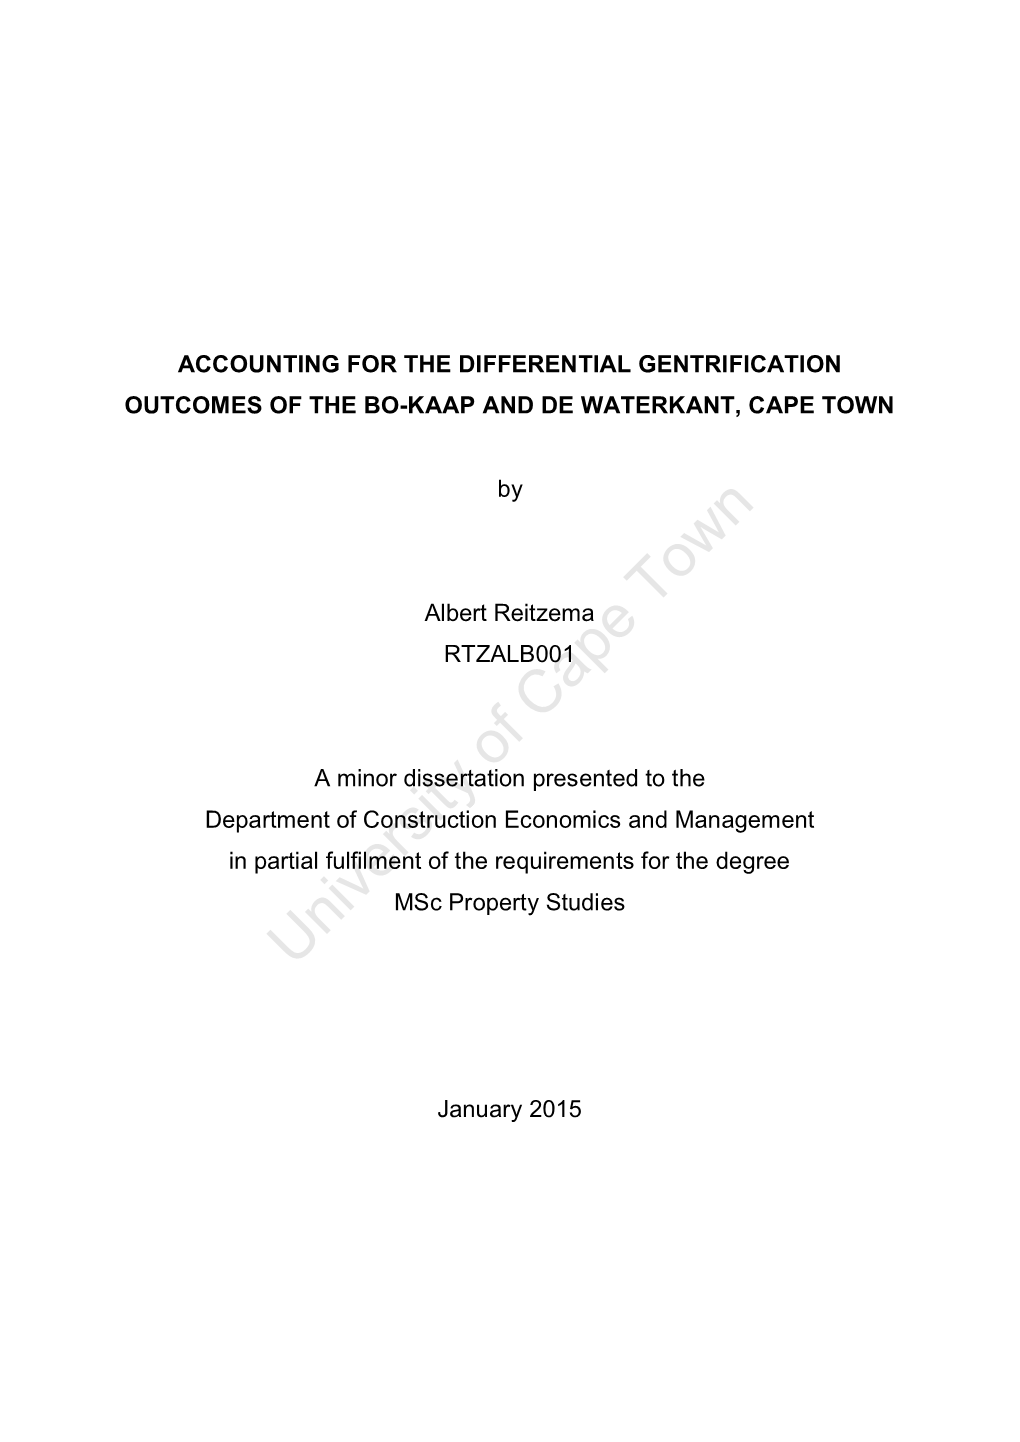 Accounting for the Differential Gentrification Outcomes of the Bo-Kaap and De Waterkant, Cape Town